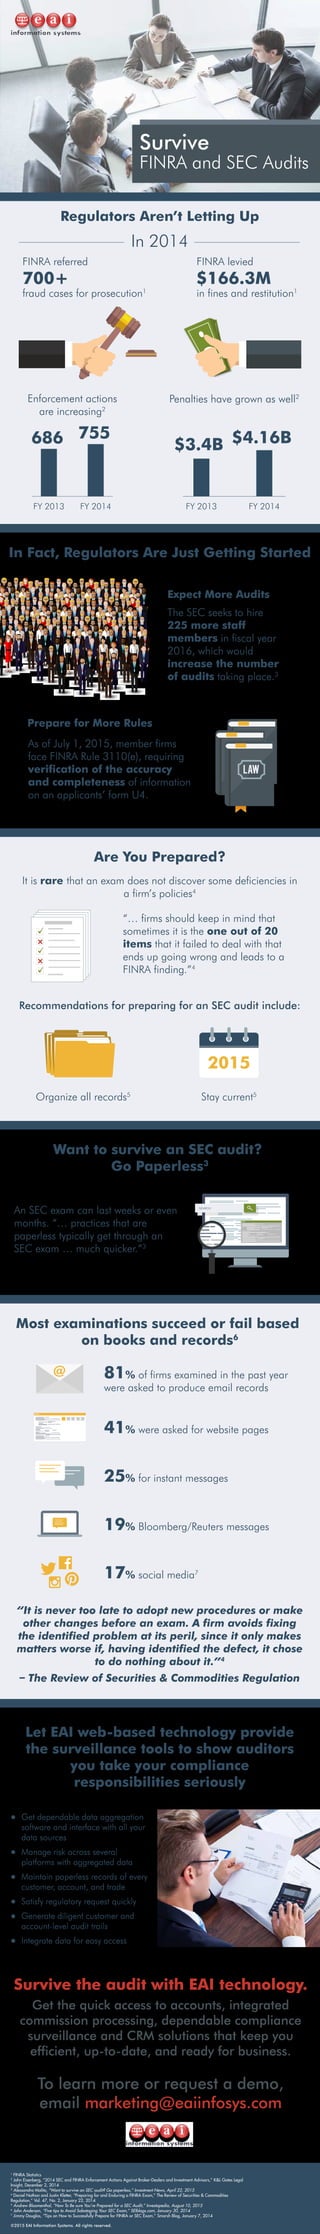 Survive
FINRA and SEC Audits
Regulators Aren’t Letting Up
In Fact, Regulators Are Just Getting Started
Are You Prepared?
Want to survive an SEC audit?
Go Paperless3
Most examinations succeed or fail based
on books and records6
In 2014
The SEC seeks to hire
225 more staff
members in fiscal year
2016, which would
increase the number
of audits taking place.3
Expect More Audits
Prepare for More Rules
As of July 1, 2015, member firms
face FINRA Rule 3110(e), requiring
verification of the accuracy
and completeness of information
on an applicants’ form U4.
It is rare that an exam does not discover some deficiencies in
a firm’s policies4
“… firms should keep in mind that
sometimes it is the one out of 20
items that it failed to deal with that
ends up going wrong and leads to a
FINRA finding.”4
Recommendations for preparing for an SEC audit include:
“It is never too late to adopt new procedures or make
other changes before an exam. A firm avoids fixing
the identified problem at its peril, since it only makes
matters worse if, having identified the defect, it chose
to do nothing about it.”4
– The Review of Securities & Commodities Regulation
An SEC exam can last weeks or even
months. “… practices that are
paperless typically get through an
SEC exam … much quicker.”3
Organize all records5
Stay current5
700+
fraud cases for prosecution1
686 755
Enforcement actions
are increasing2
Penalties have grown as well2
FINRA referred FINRA levied
FY 2013 FY 2014
$3.4B $4.16B
$166.3M
in fines and restitution1
To learn more or request a demo,
email marketing@eaiinfosys.com
Survive the audit with EAI technology.
Get the quick access to accounts, integrated
commission processing, dependable compliance
surveillance and CRM solutions that keep you
efficient, up-to-date, and ready for business.
1
FINRA Statistics
2
John Eisenberg, “2014 SEC and FINRA Enforcement Actions Against Broker-Dealers and Investment Advisors,” K&L Gates Legal
Insight, December 2, 2014
3
Alessandra Malito, “Want to survive an SEC audit? Go paperless,” Investment News, April 22, 2015
4
Daniel Nathan and Justin Kletter, “Preparing for and Enduring a FINRA Exam,” The Review of Securities & Commodities
Regulation,” Vol. 47, No. 2, January 22, 2014
5
Andrew Bloomenthal, “How To Be sure You’re Prepared for a SEC Audit,” Investopedia, August 10, 2015
6
John Anderson, “Five tips to Avoid Sabotaging Your SEC Exam,” SEIblogs.com, January 30, 2014
7
Jimmy Douglas, “Tips on How to Successfully Prepare for FINRA or SEC Exam,” Smarsh Blog, January 7, 2014
@ 81% of firms examined in the past year
were asked to produce email records
19% Bloomberg/Reuters messages
17% social media7
41% were asked for website pages
25% for instant messages
Let EAI web-based technology provide
the surveillance tools to show auditors
you take your compliance
responsibilities seriously
Get dependable data aggregation
software and interface with all your
data sources
Manage risk across several
platforms with aggregated data
Maintain paperless records of every
customer, account, and trade
Satisfy regulatory request quickly
Generate diligent customer and
account-level audit trails
Integrate data for easy access
©2015 EAI Information Systems. All rights reserved.
FY 2013 FY 2014
2015
 